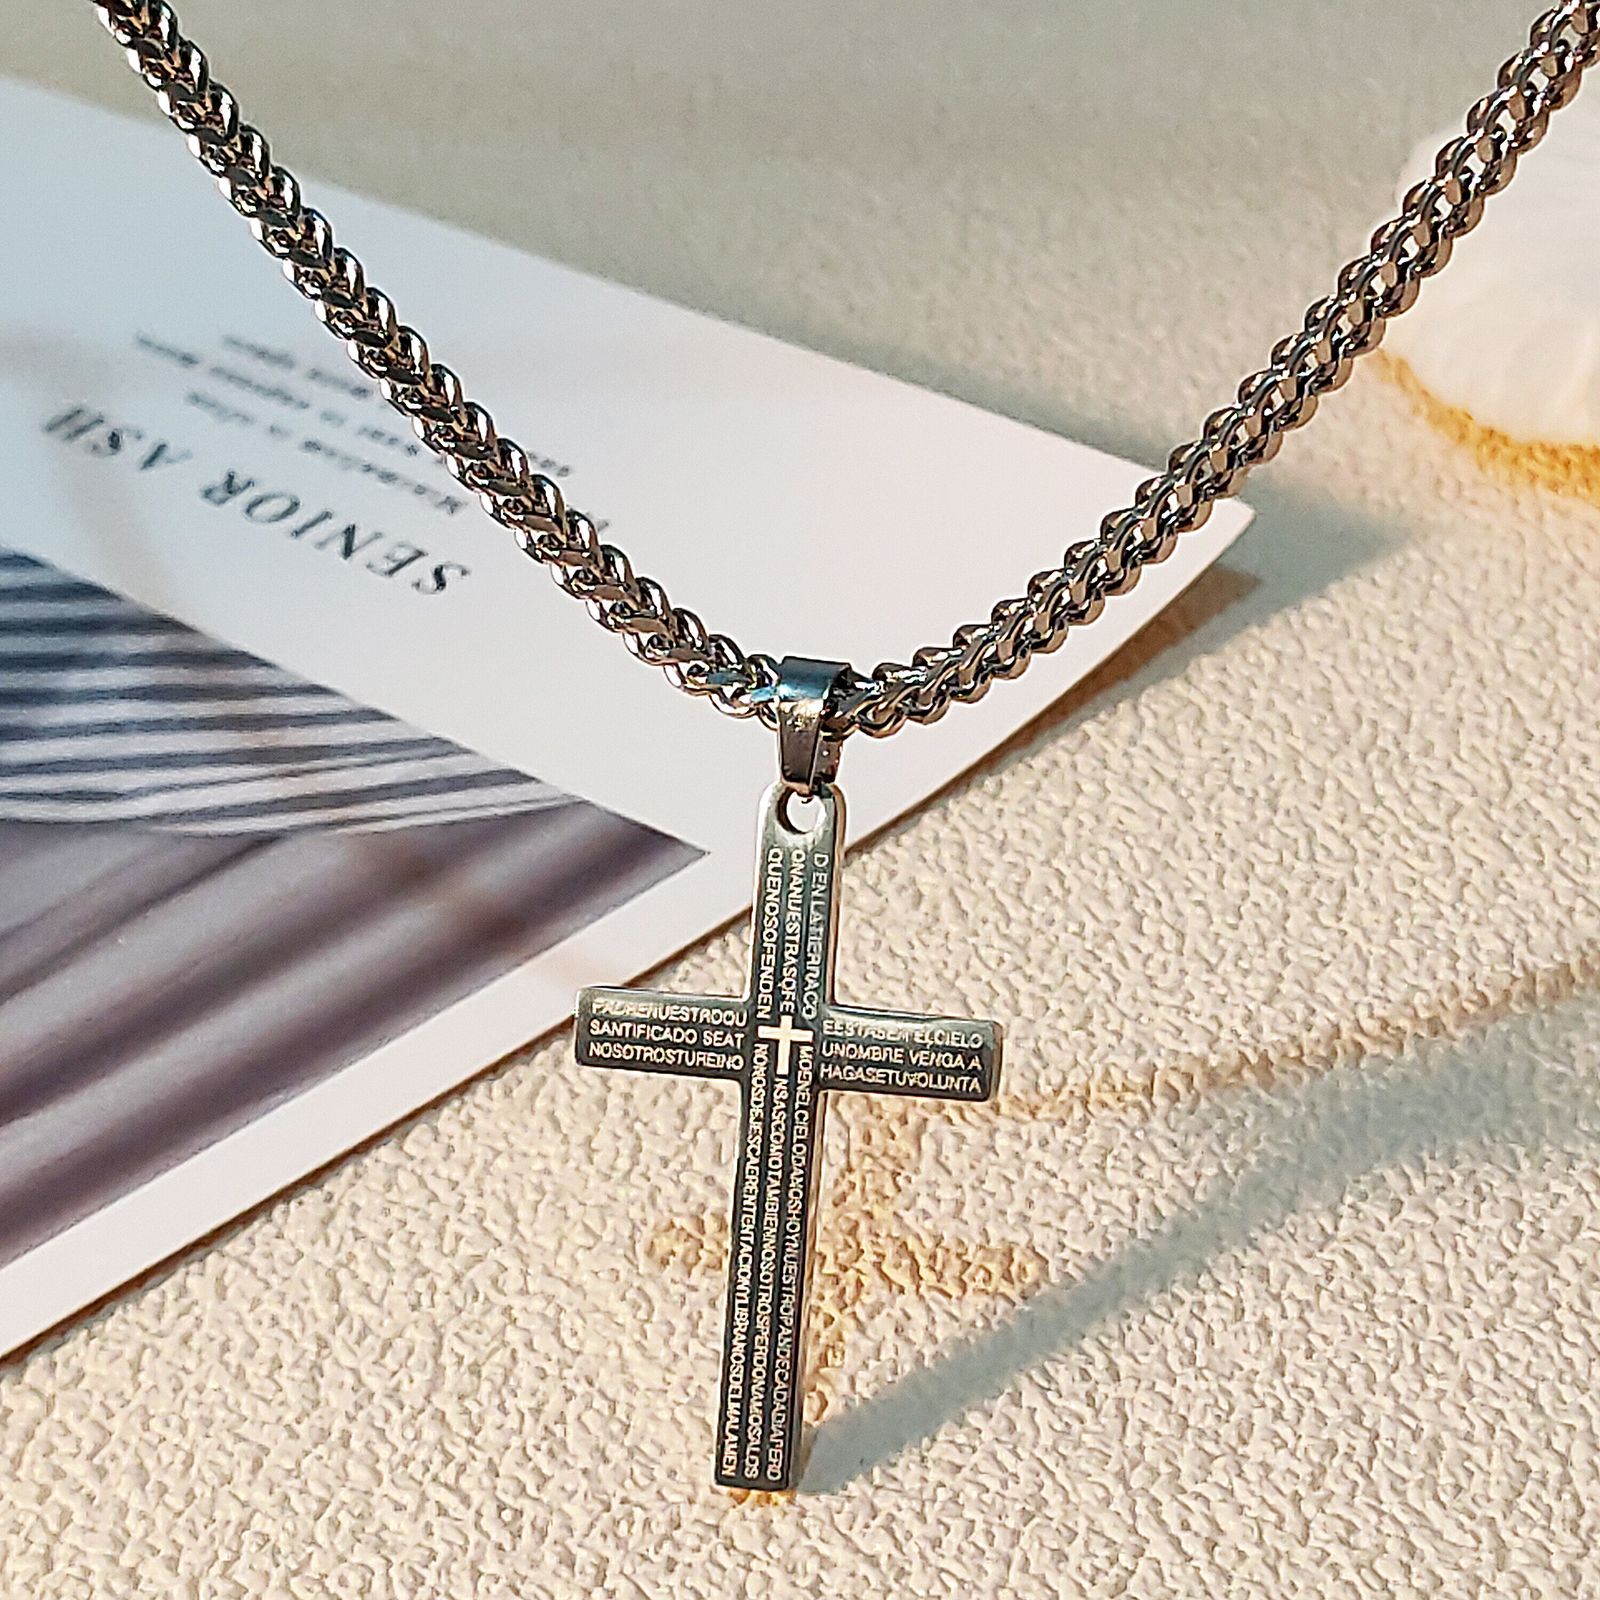 Stainless steel cross necklace with reversible cha